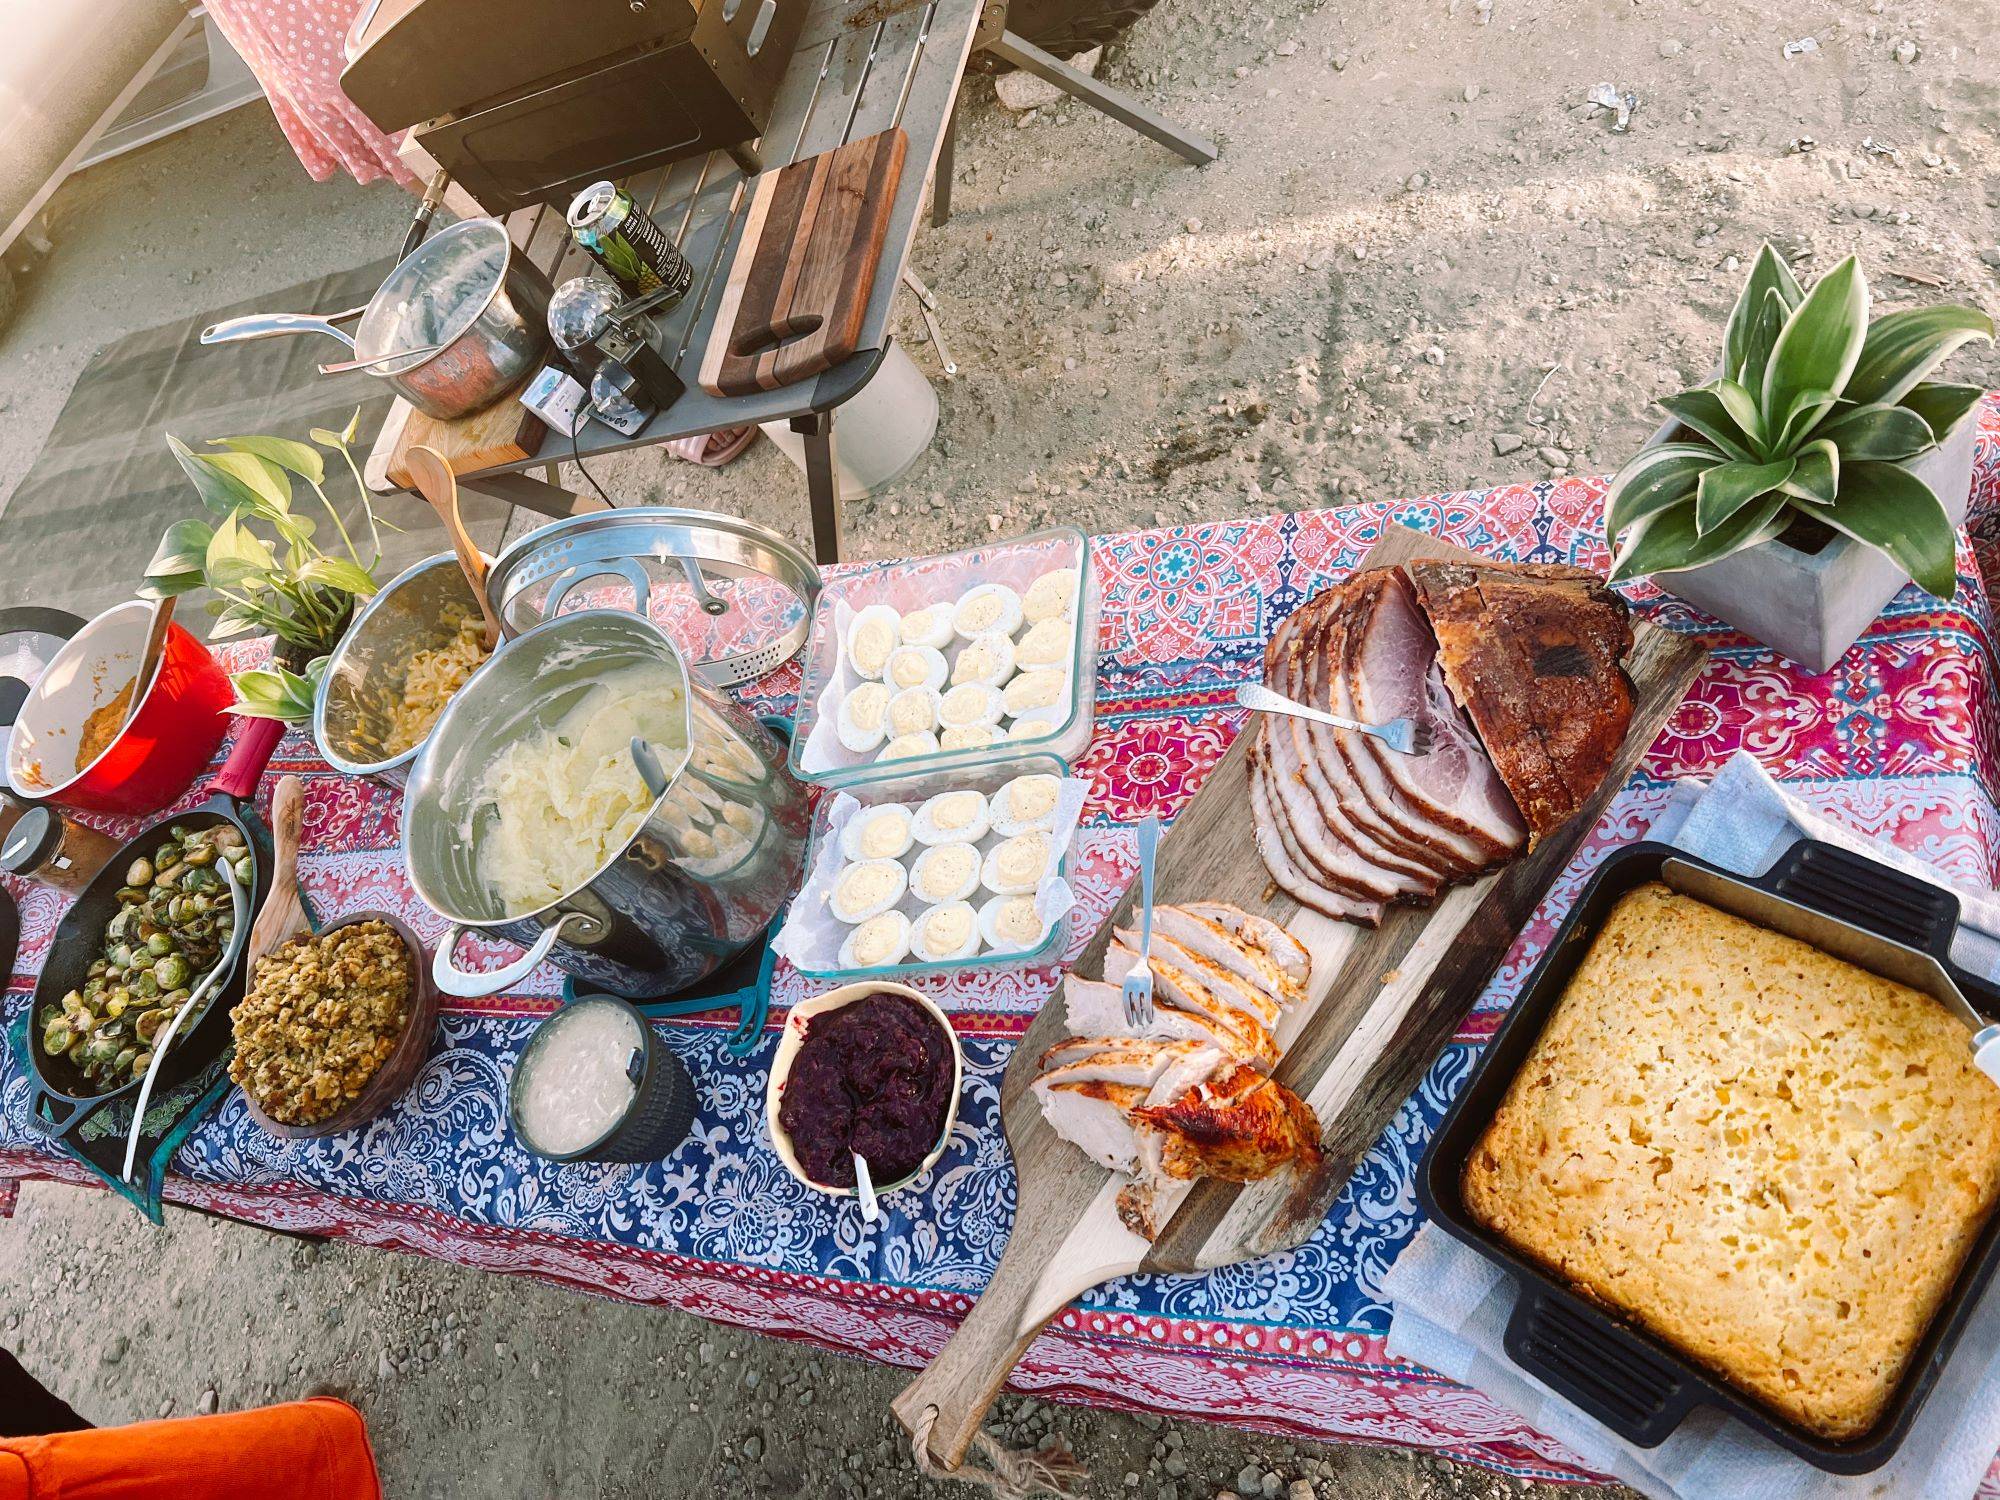 A thanksgiving feast prepared by seven solo female vanlifers